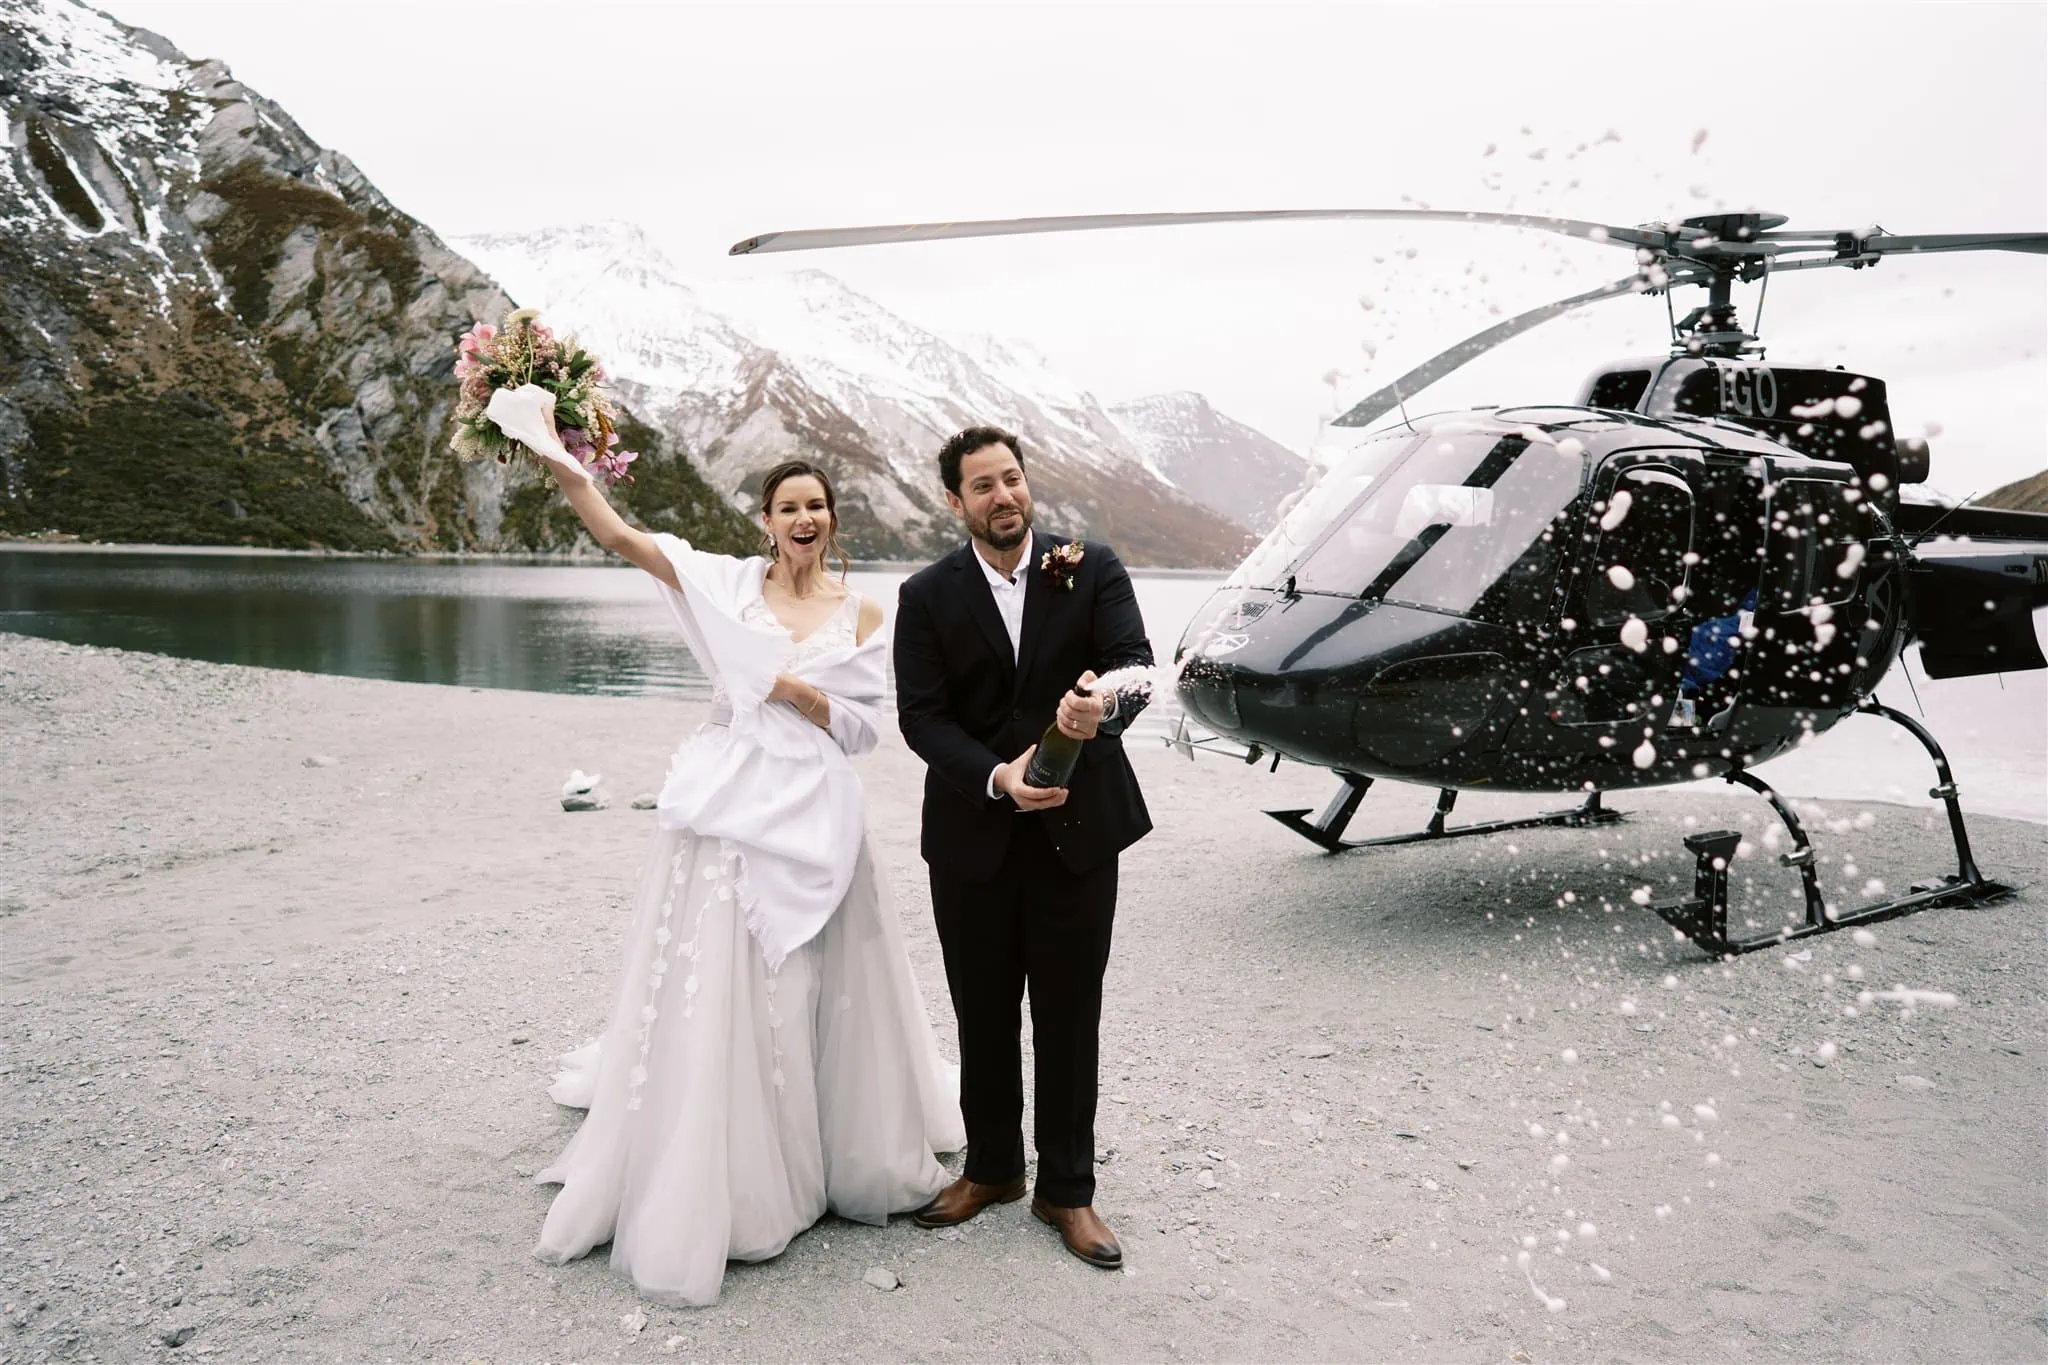 Queenstown New Zealand Elopement Wedding Photographer - Alex & Shahar's Queenstown elopement captures them in a romantic moment, standing together in front of a helicopter.